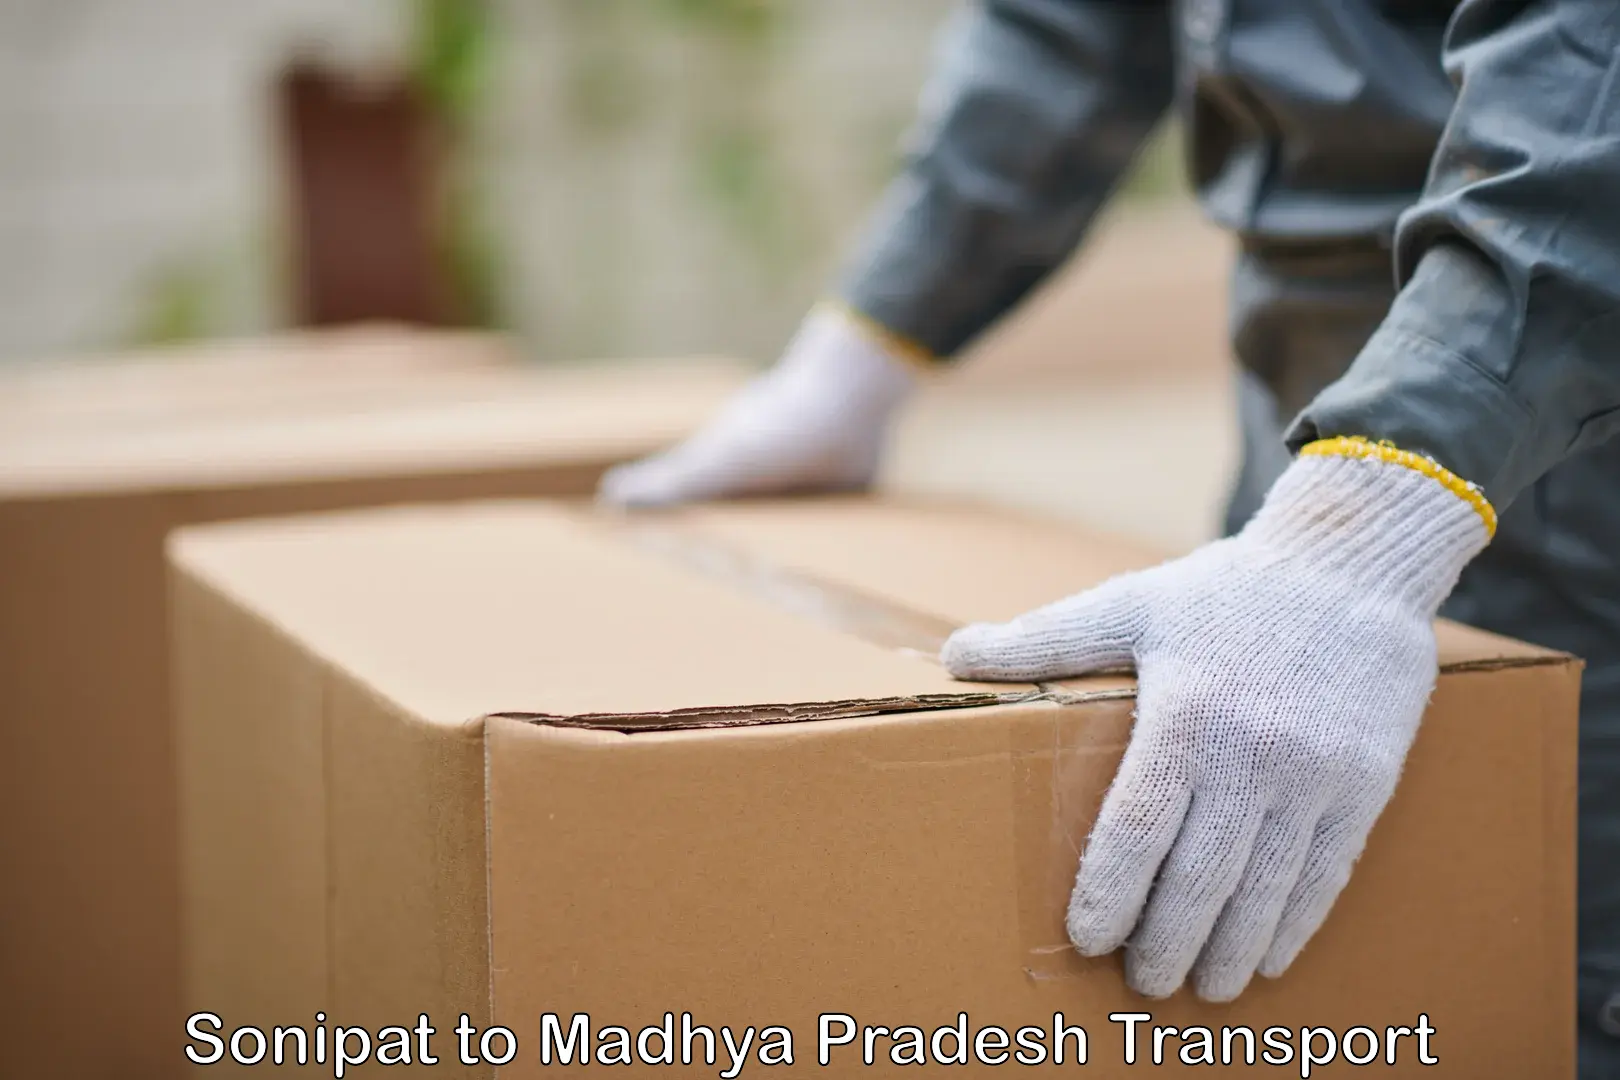 Road transport online services Sonipat to Bajag